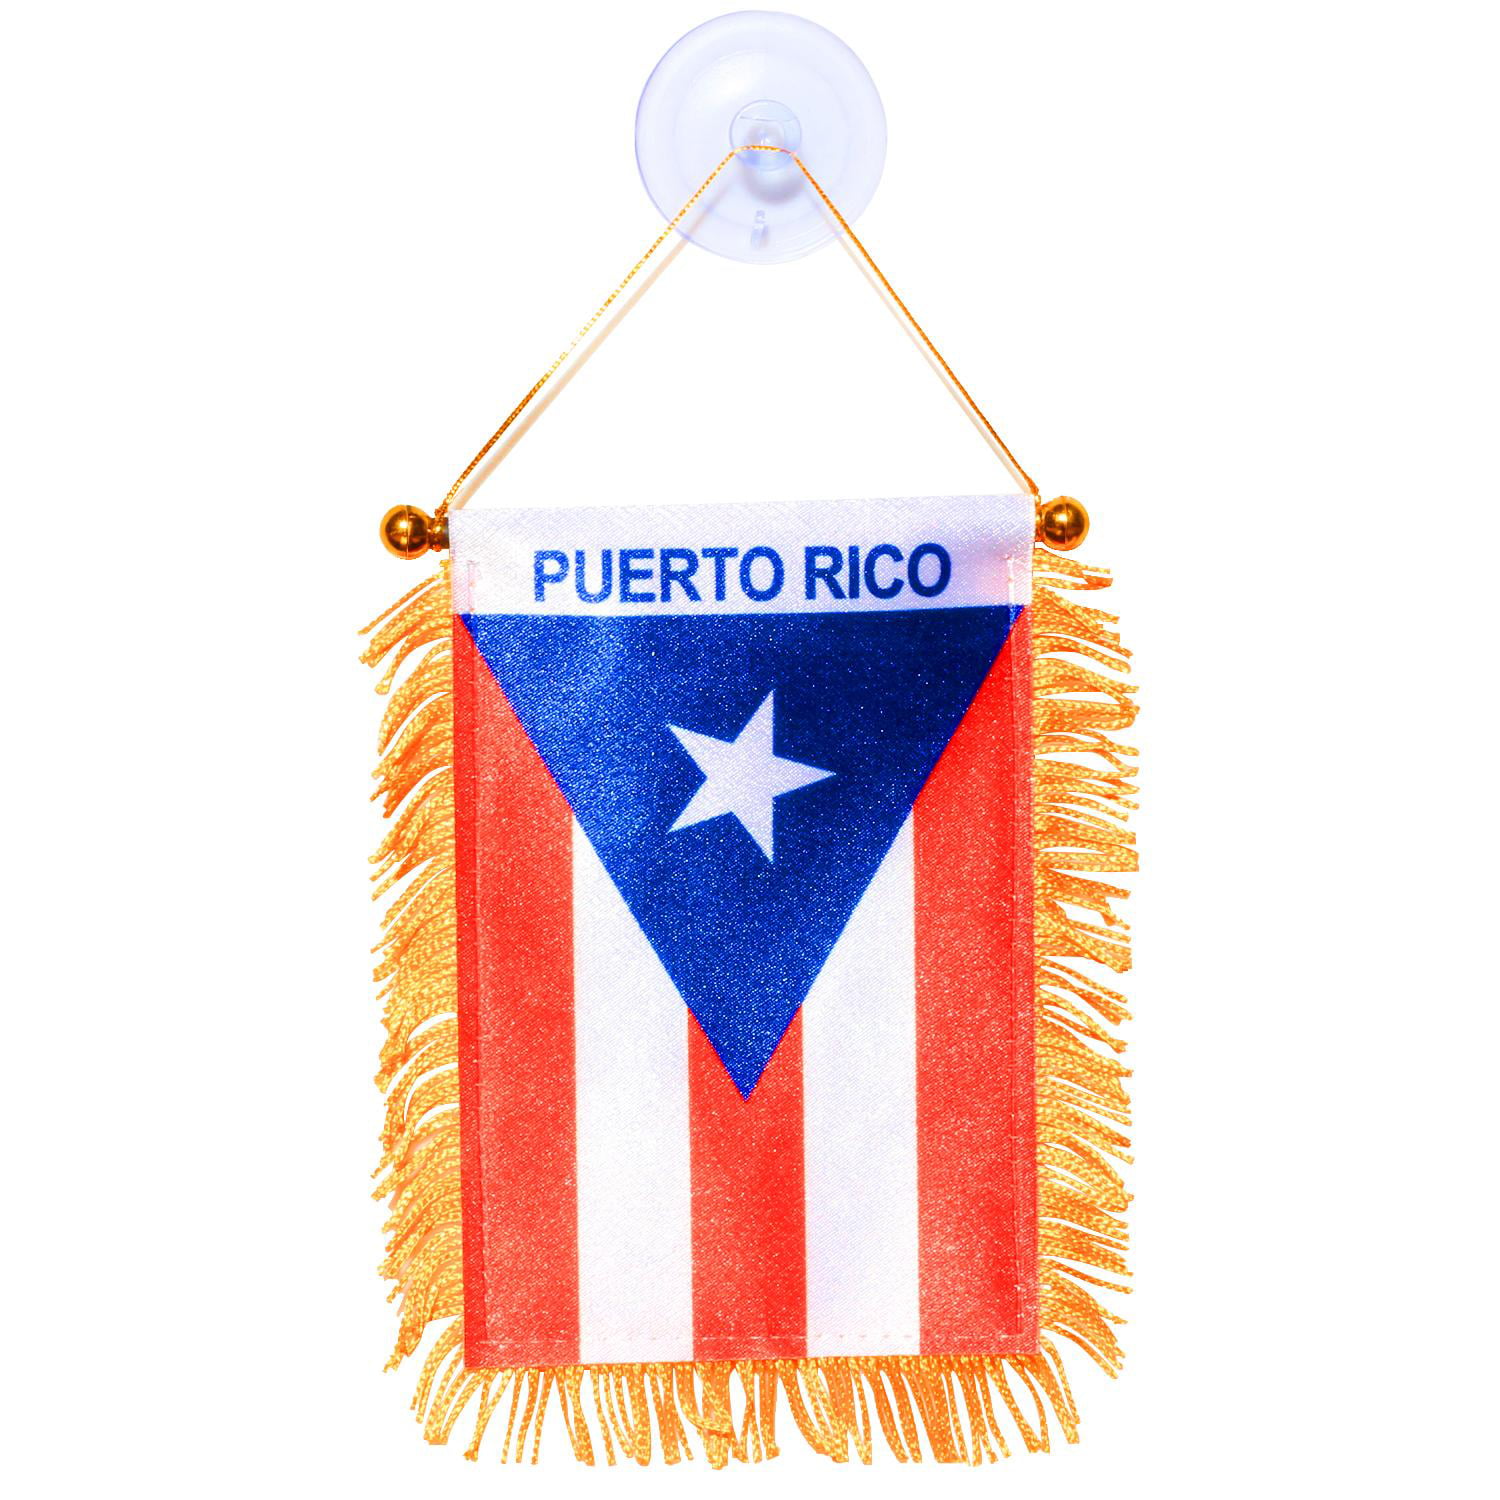 LOT OF 3 Assorted Puerto Rico Mini Banner 4 x 6 Flag Car Window Rican WHOLESALE 